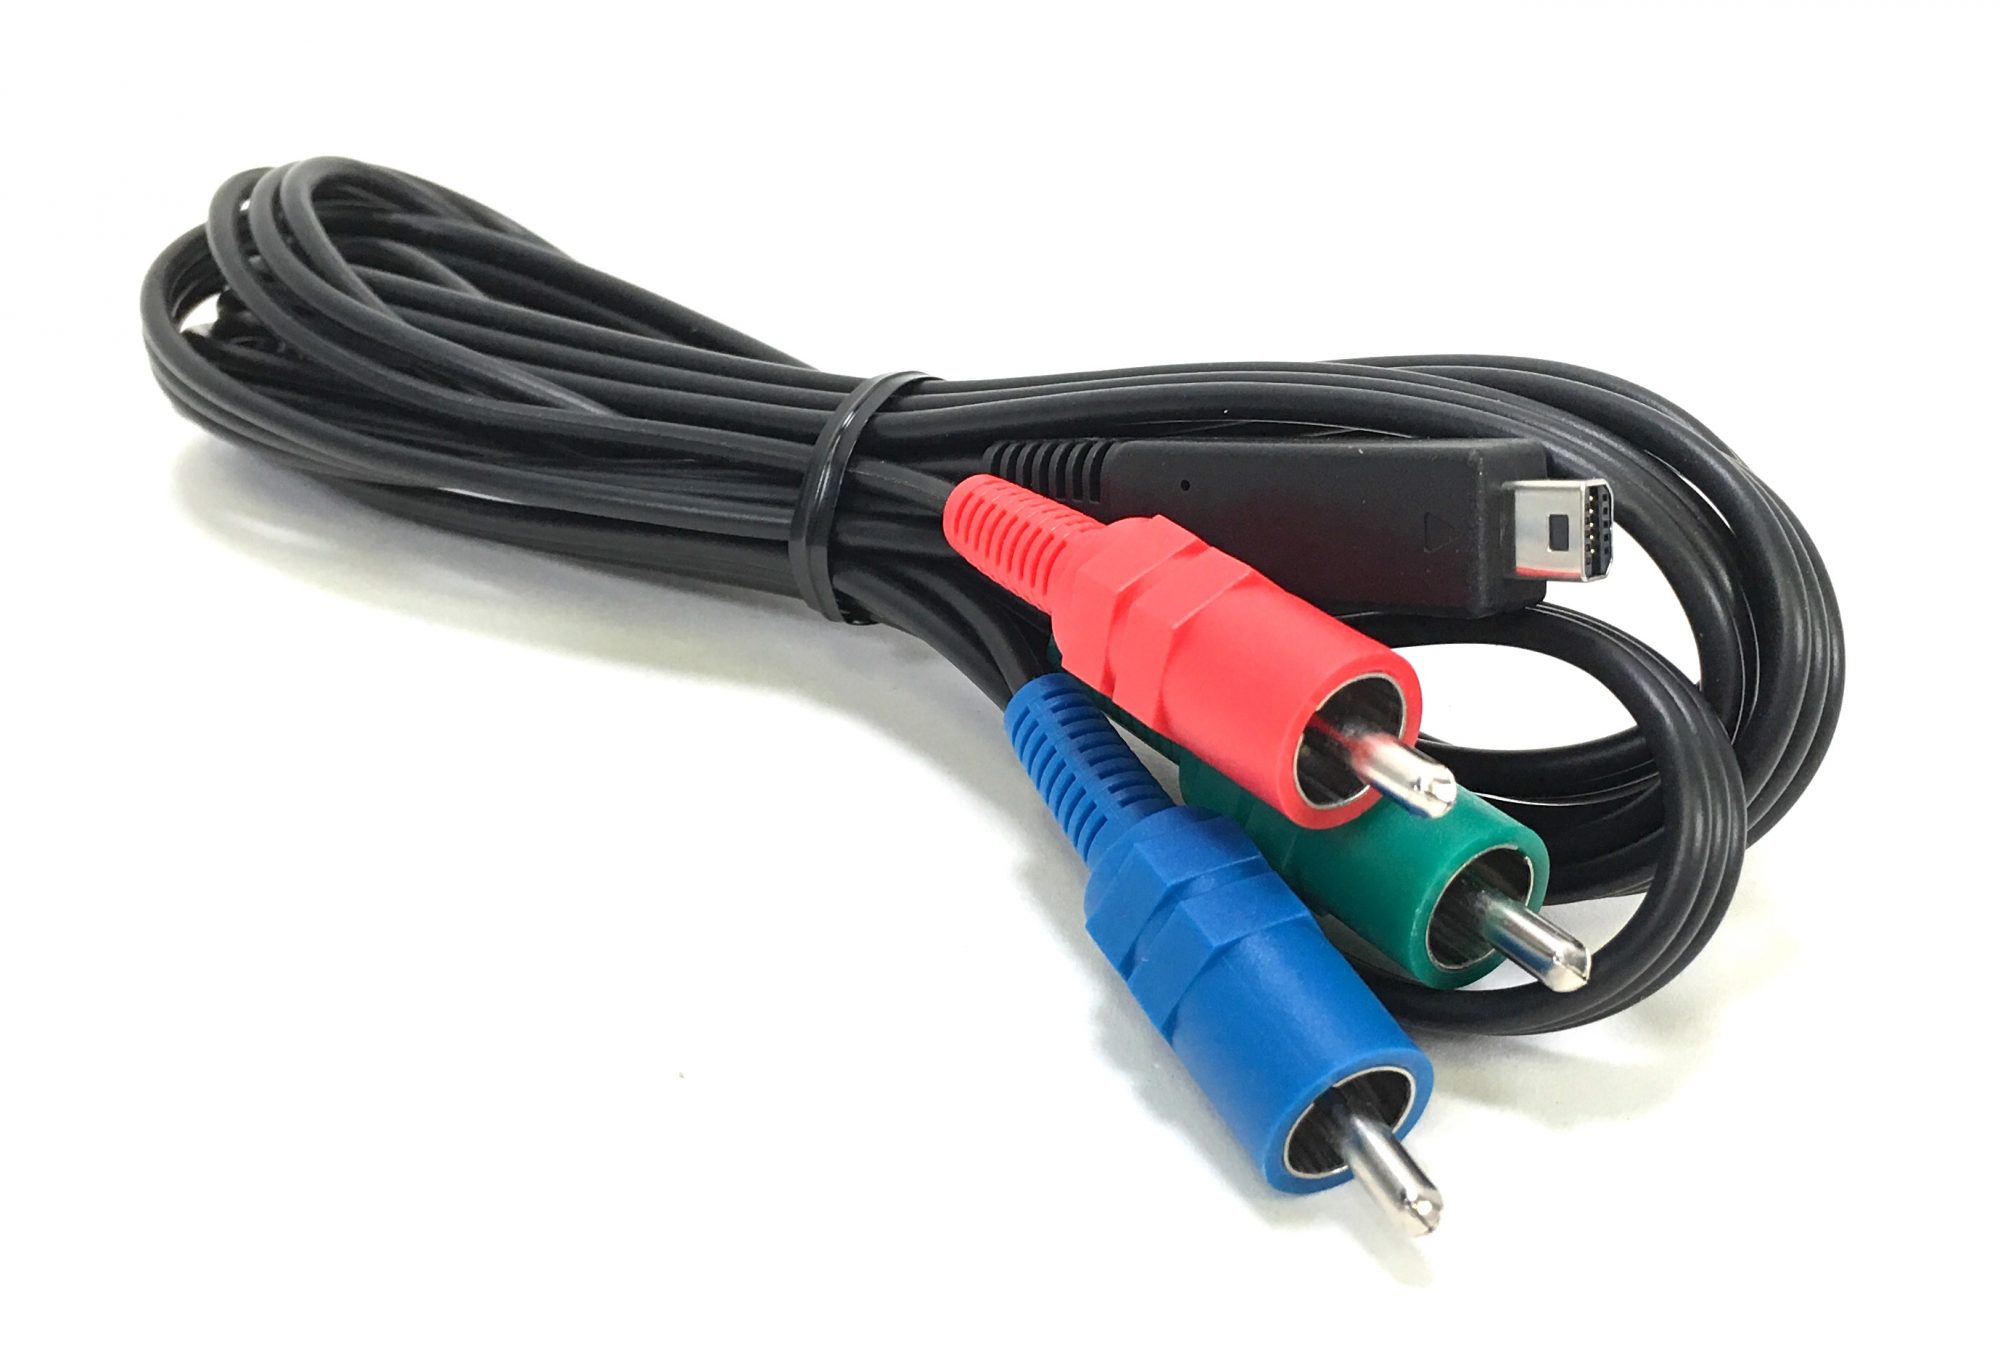 Original Component Video Cable that came with the Sony NEX-FS700 camcorder. It is a genuine Sony part, sourced directly from Sony USA. Brand new factory fresh. Free Shipping.